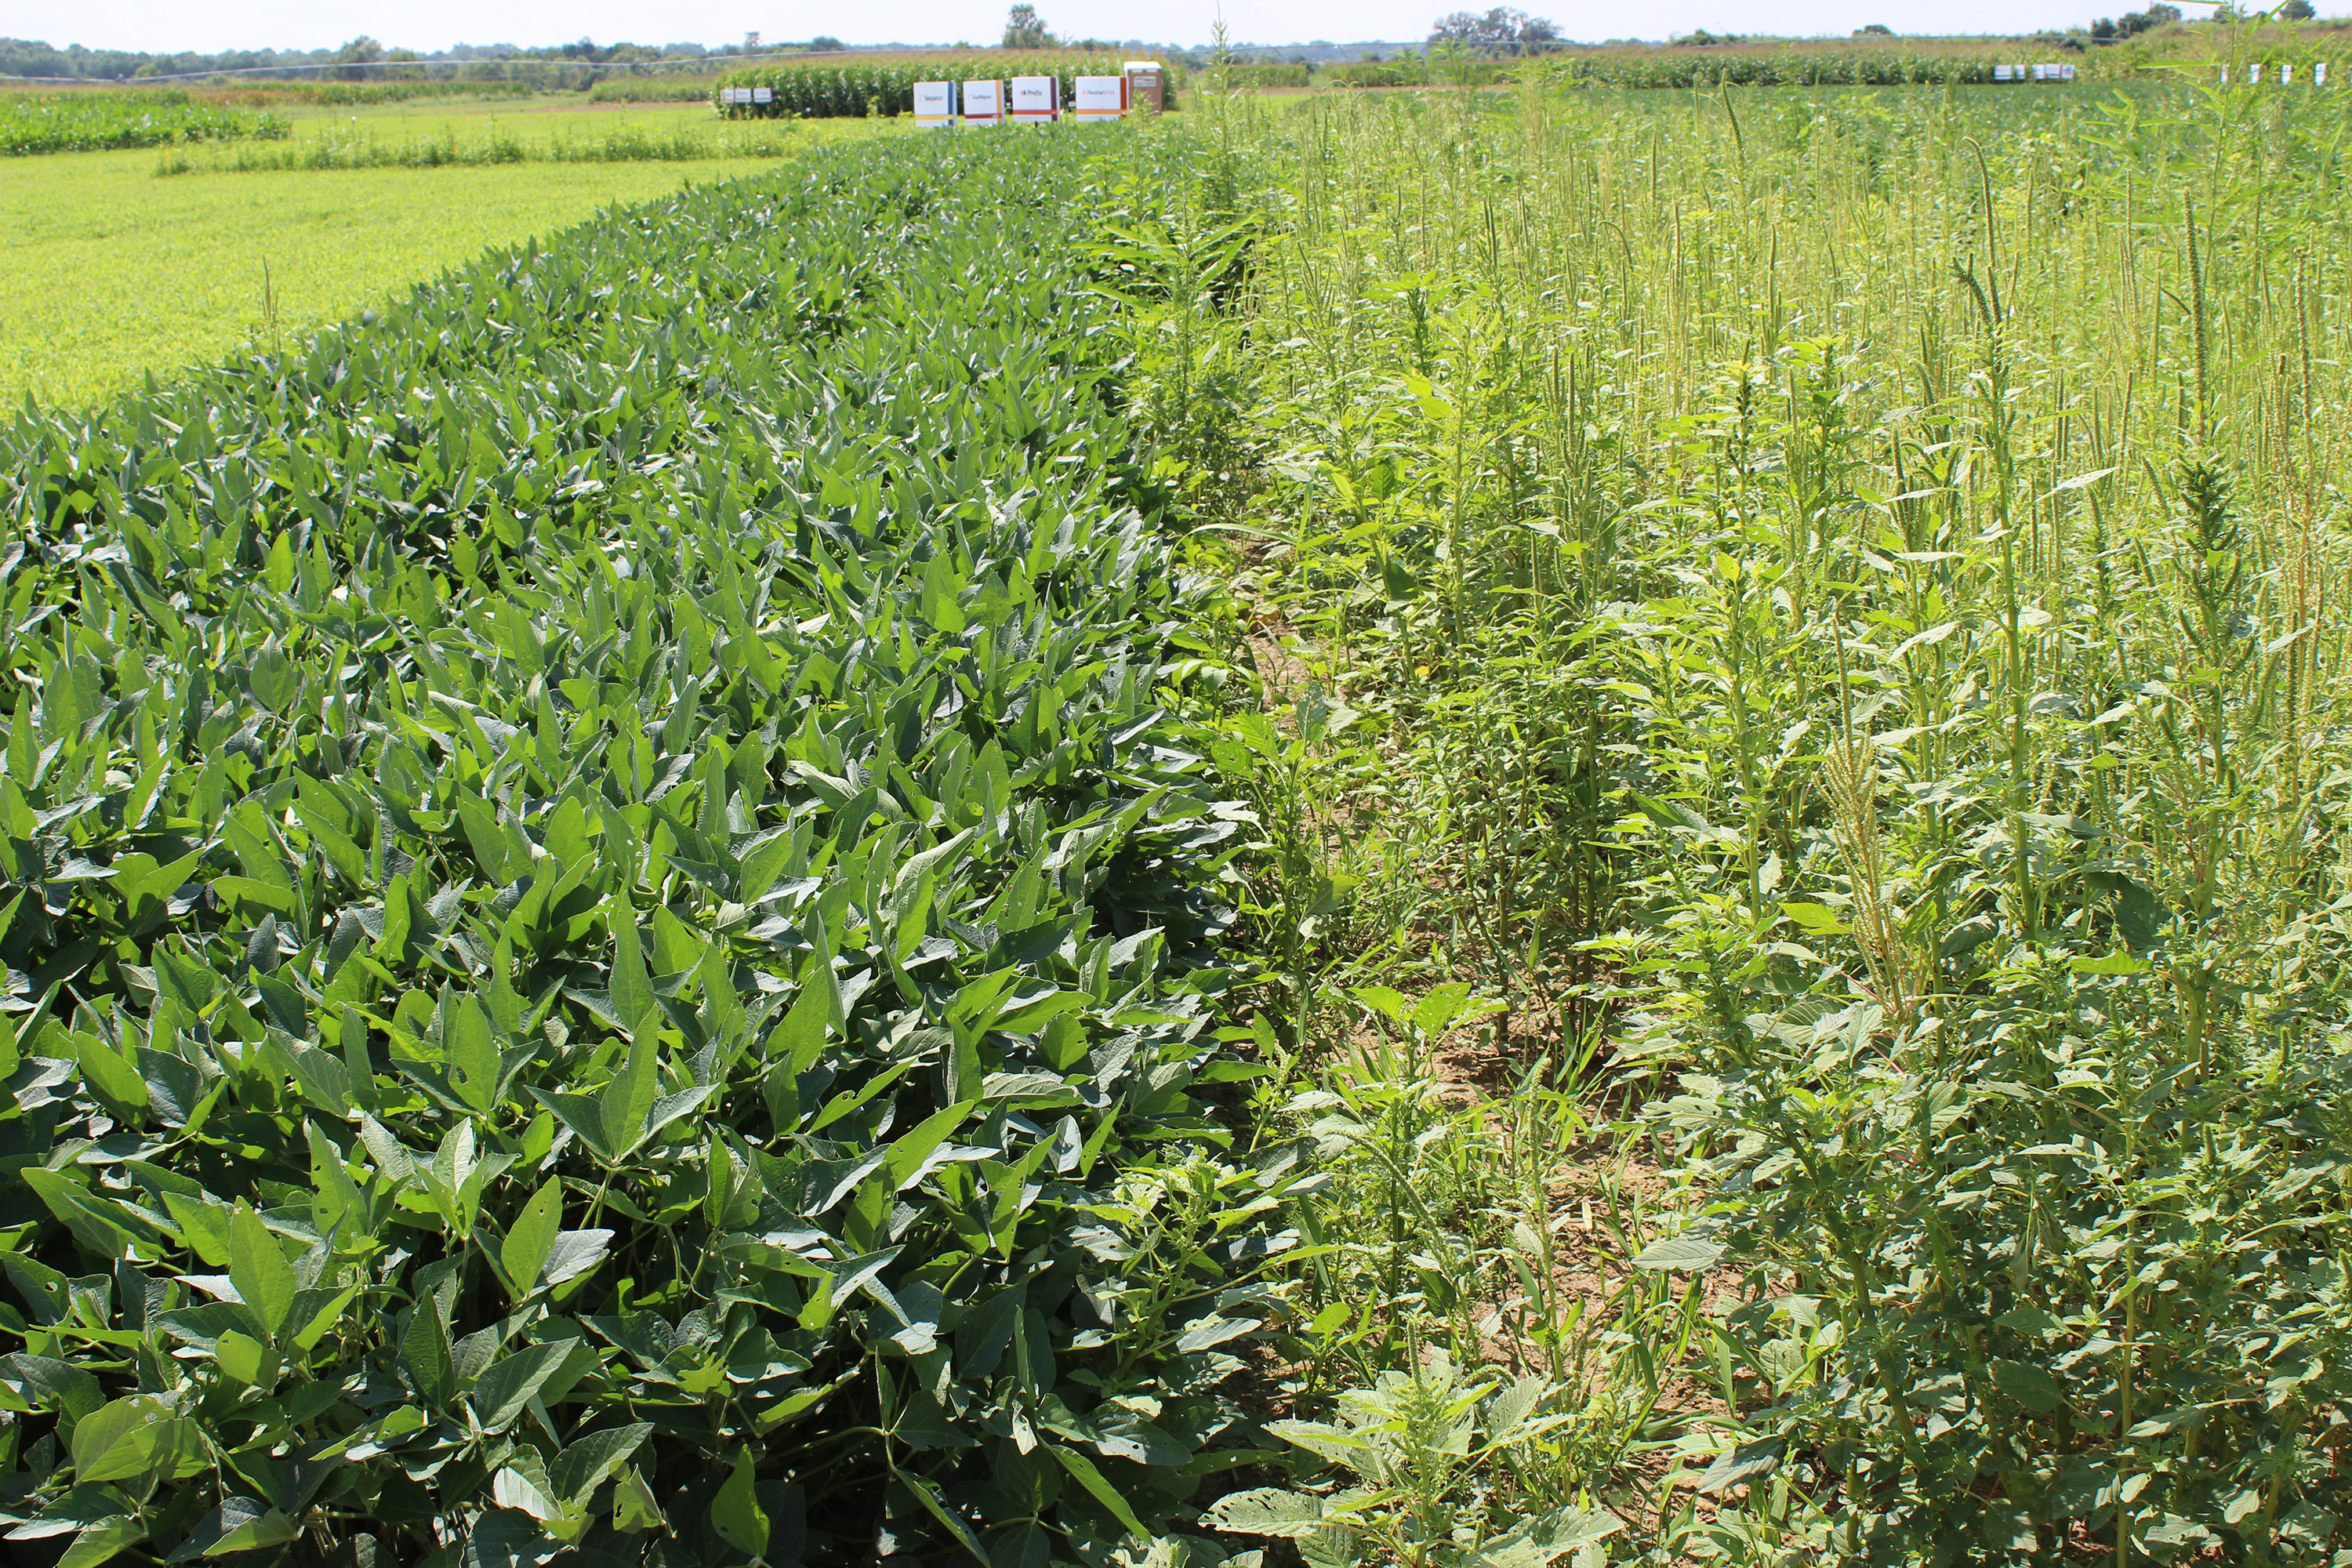 An agronomic image showing weed management.